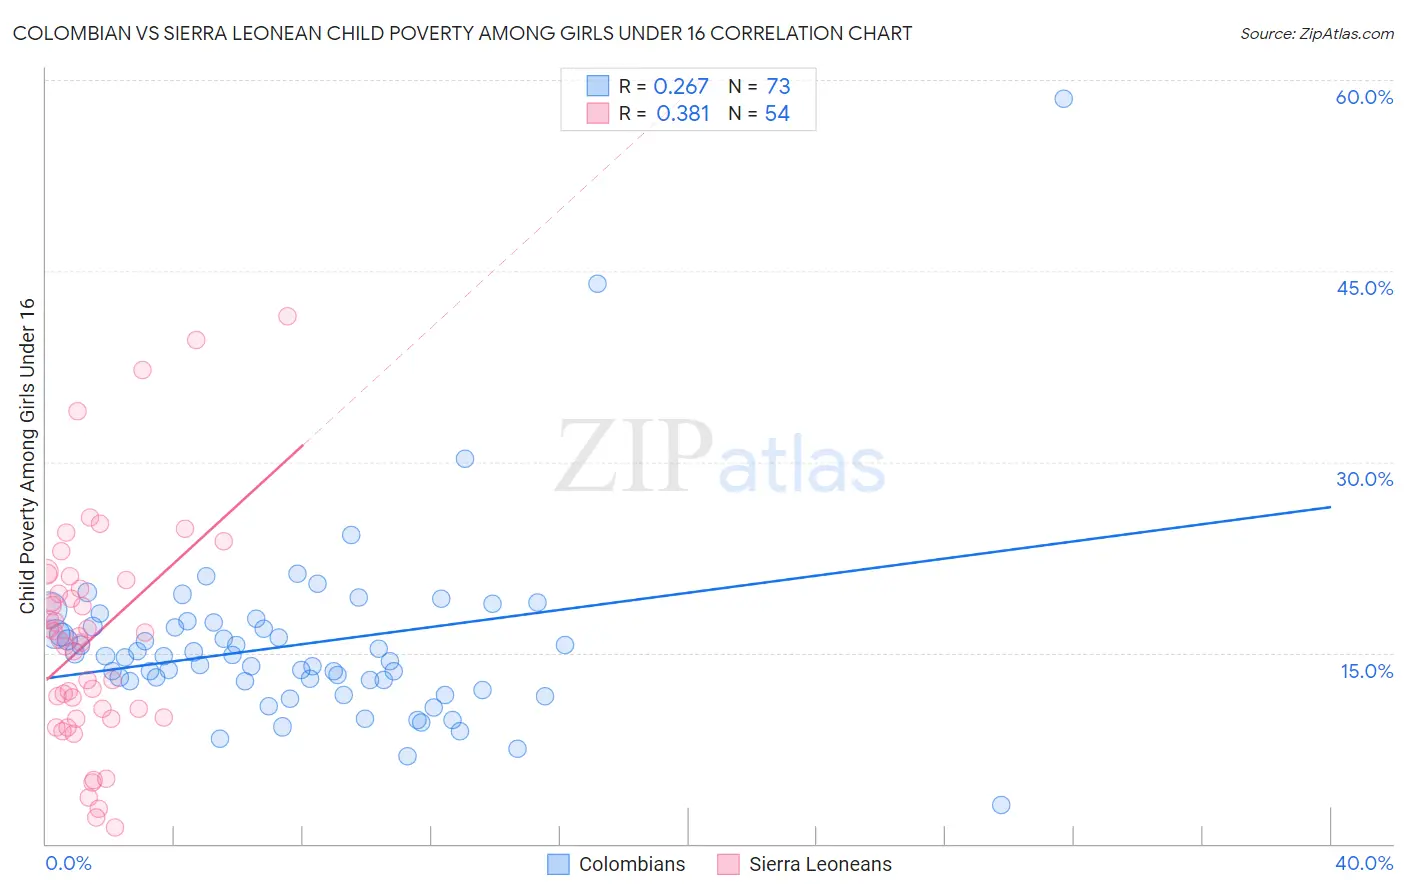 Colombian vs Sierra Leonean Child Poverty Among Girls Under 16